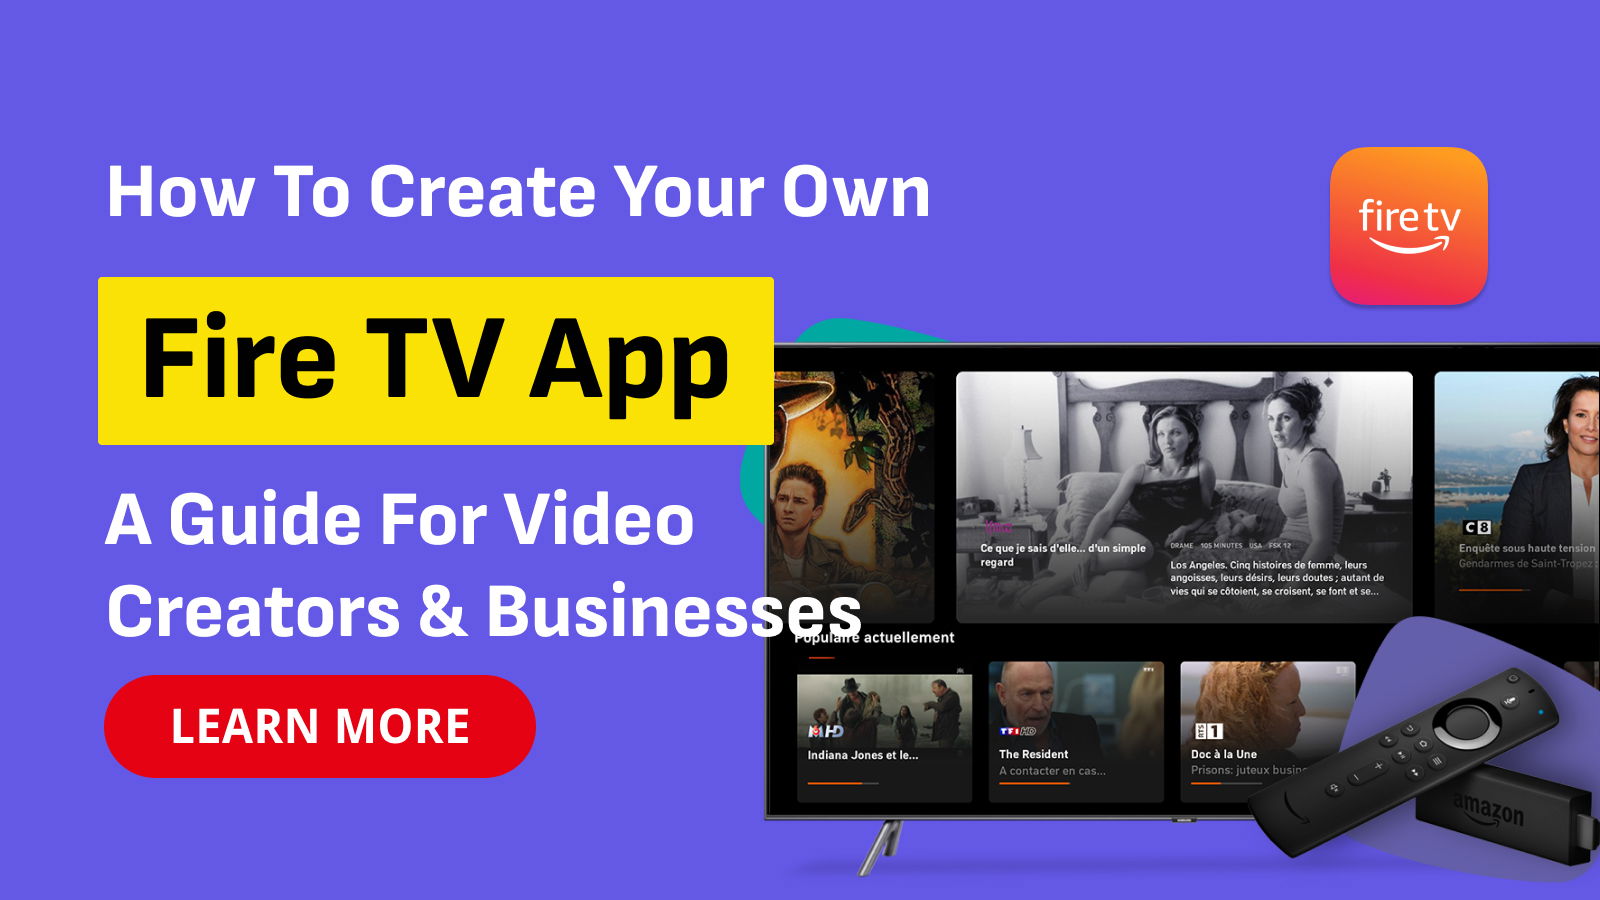 How to Create Your Own Fire TV App: A Guide for Video Creators & Businesses